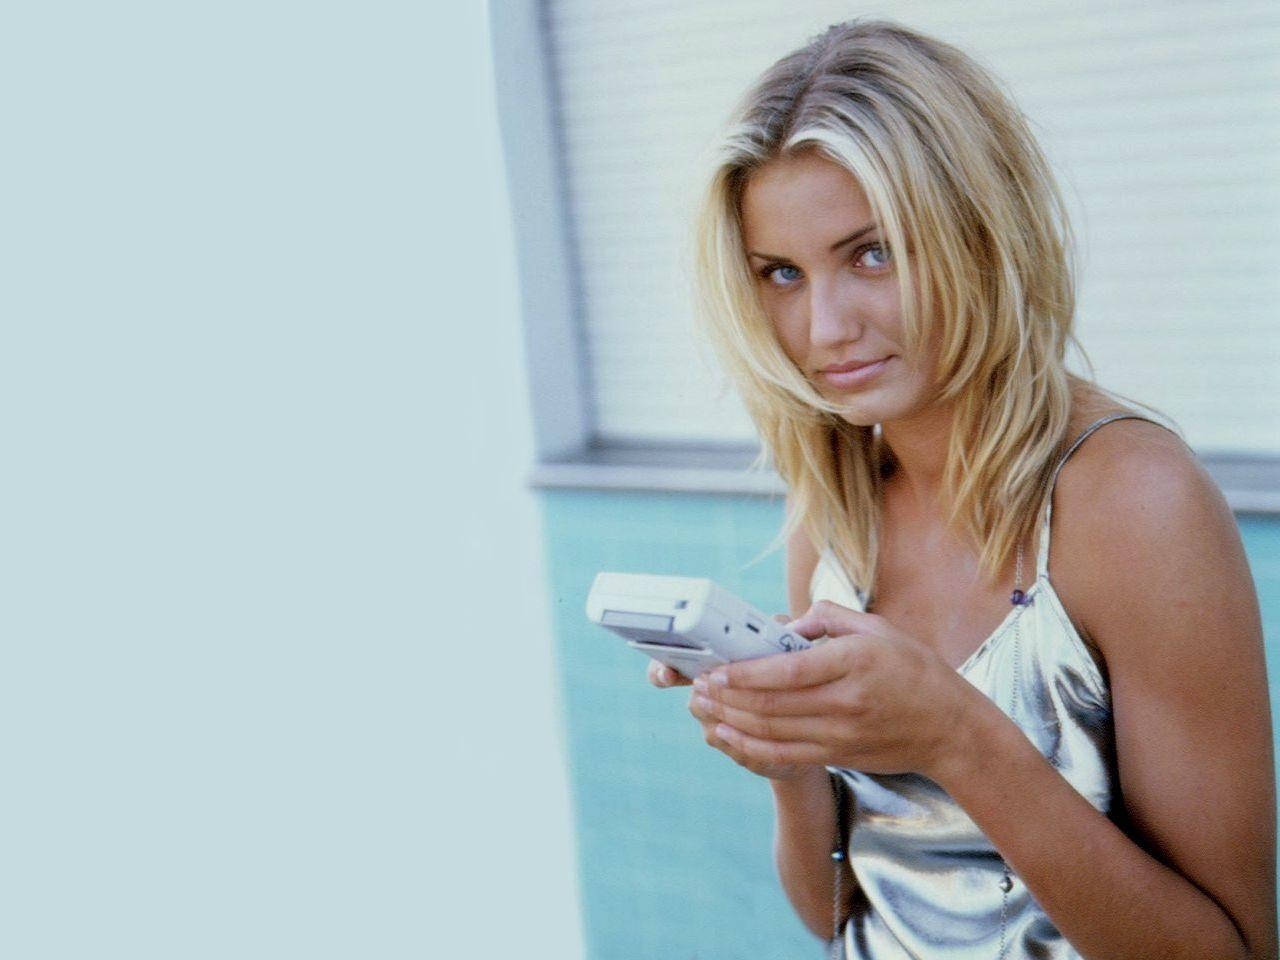 Cameron Diaz Engaged in a Call on a White Smartphone Wallpaper